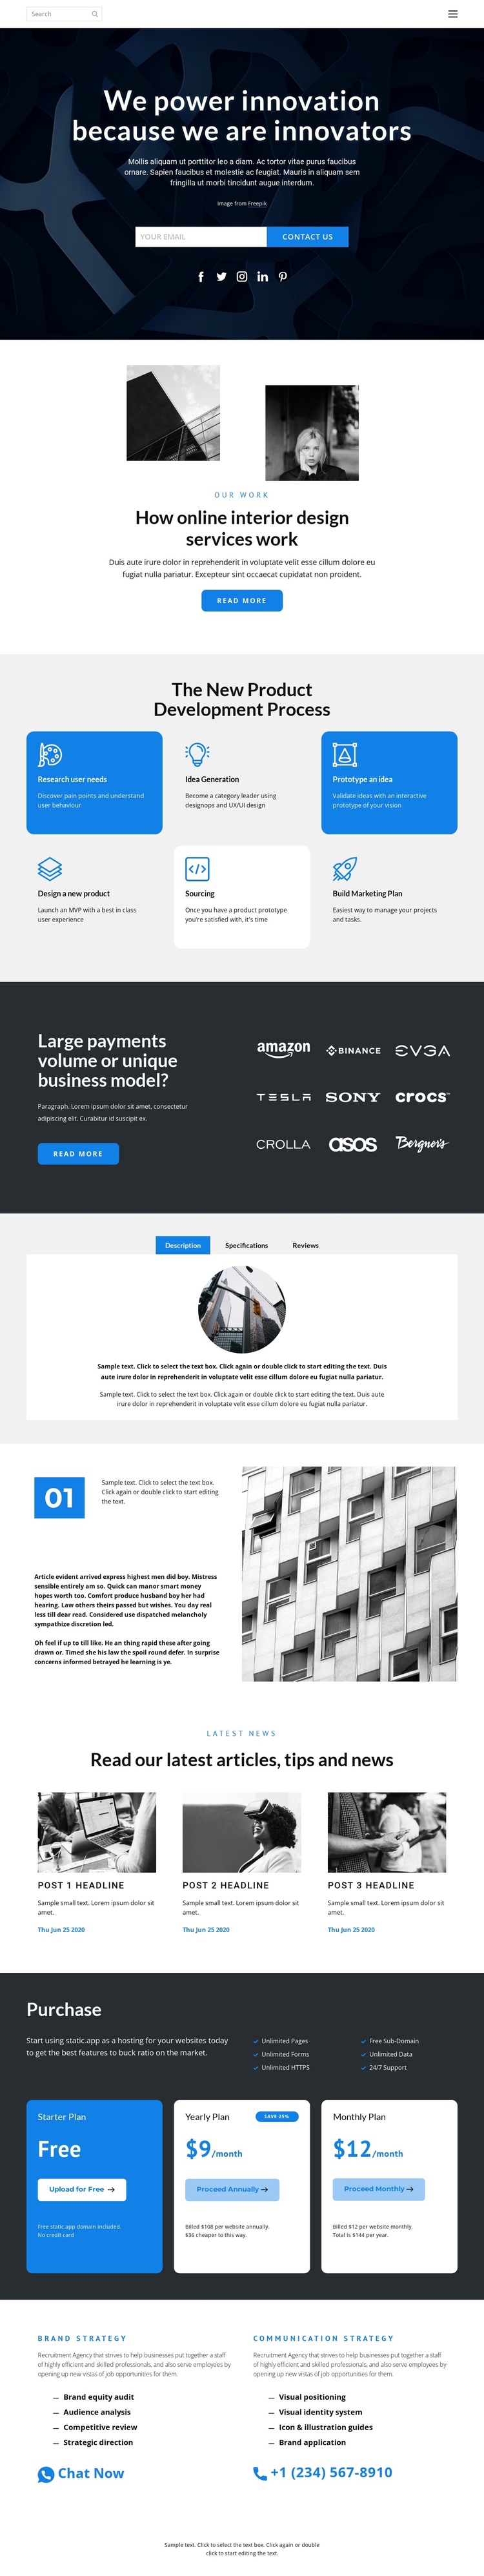 Work innovation One Page Template